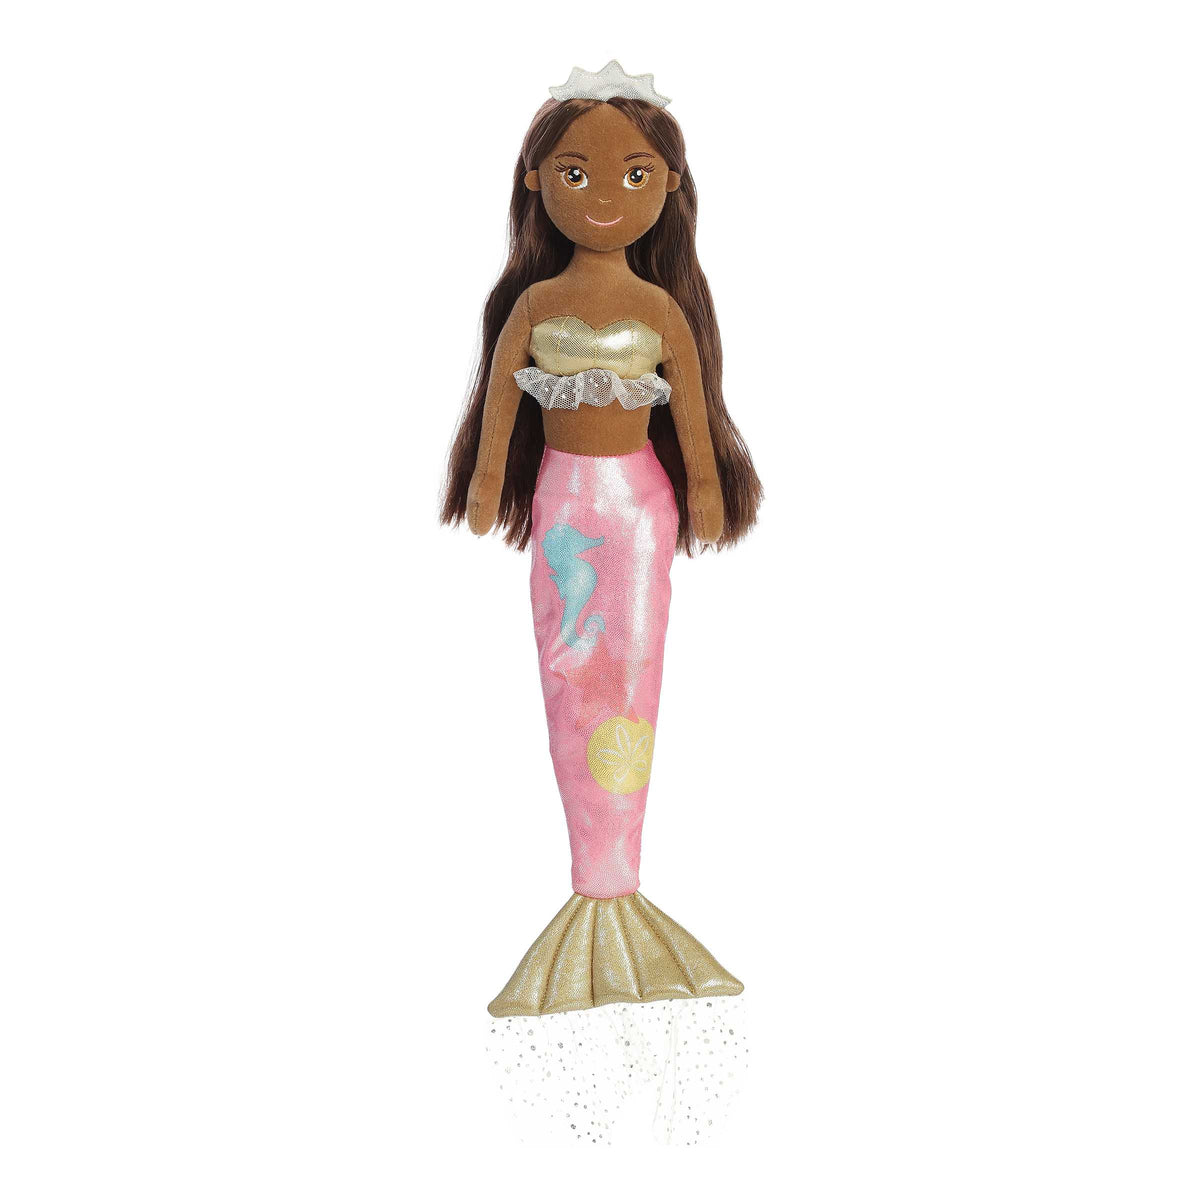 Seychelles mermaid plush with radiant pink tail and tiara, ideal for fantastical play and oceanic magic.